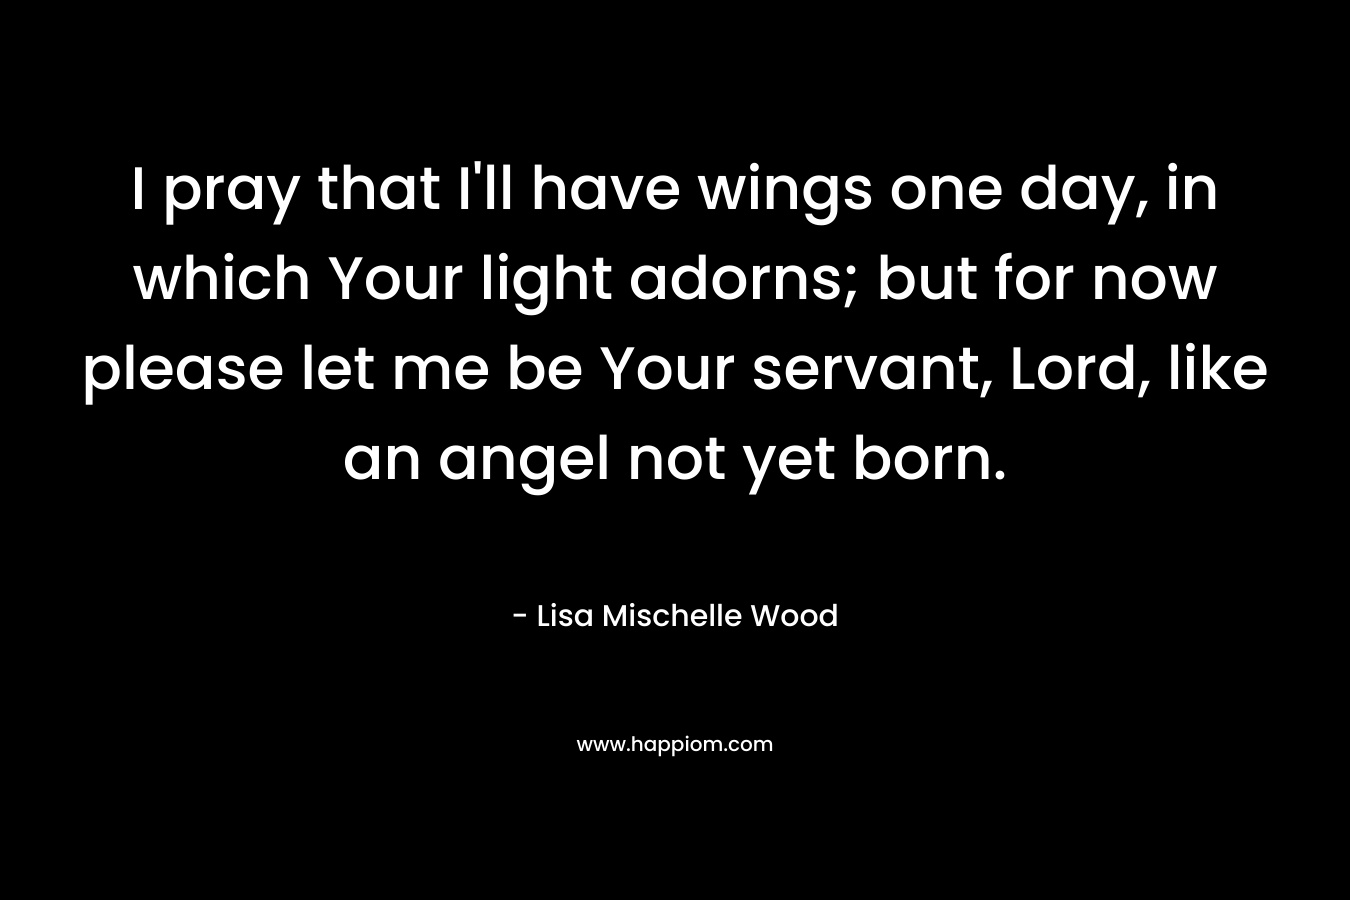 I pray that I’ll have wings one day, in which Your light adorns; but for now please let me be Your servant, Lord, like an angel not yet born. – Lisa Mischelle Wood